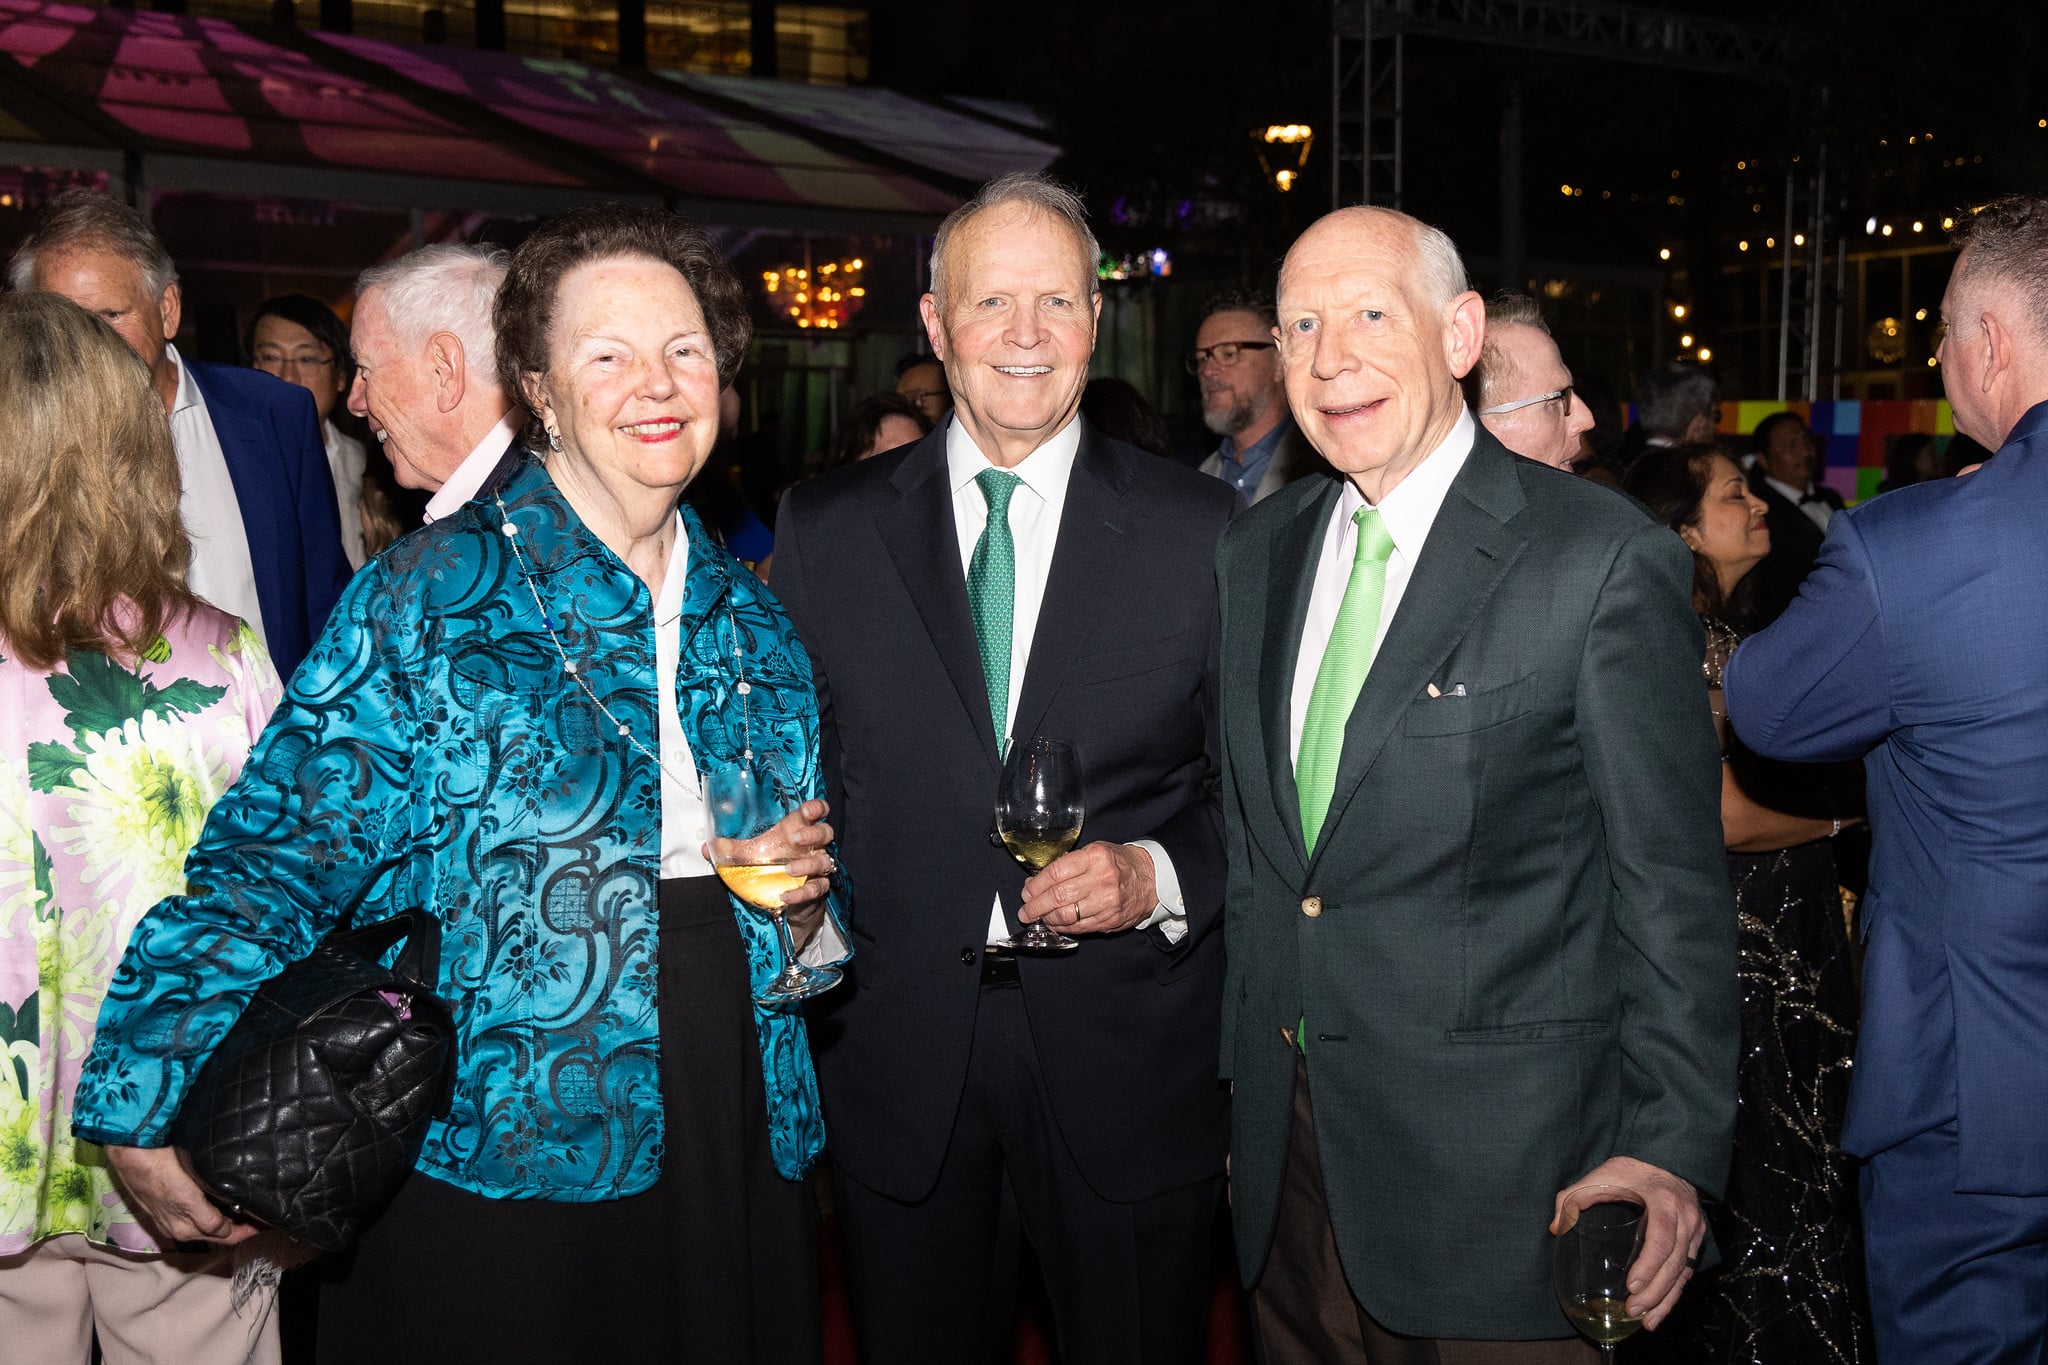 From L-R: Mary Ann Faulkner, Larry Faulkner, Bill White  Gala on the Green® at Discovery Green in downtown Houston. February 23, 2023. Photo: Lawrence Elizabeth Knox